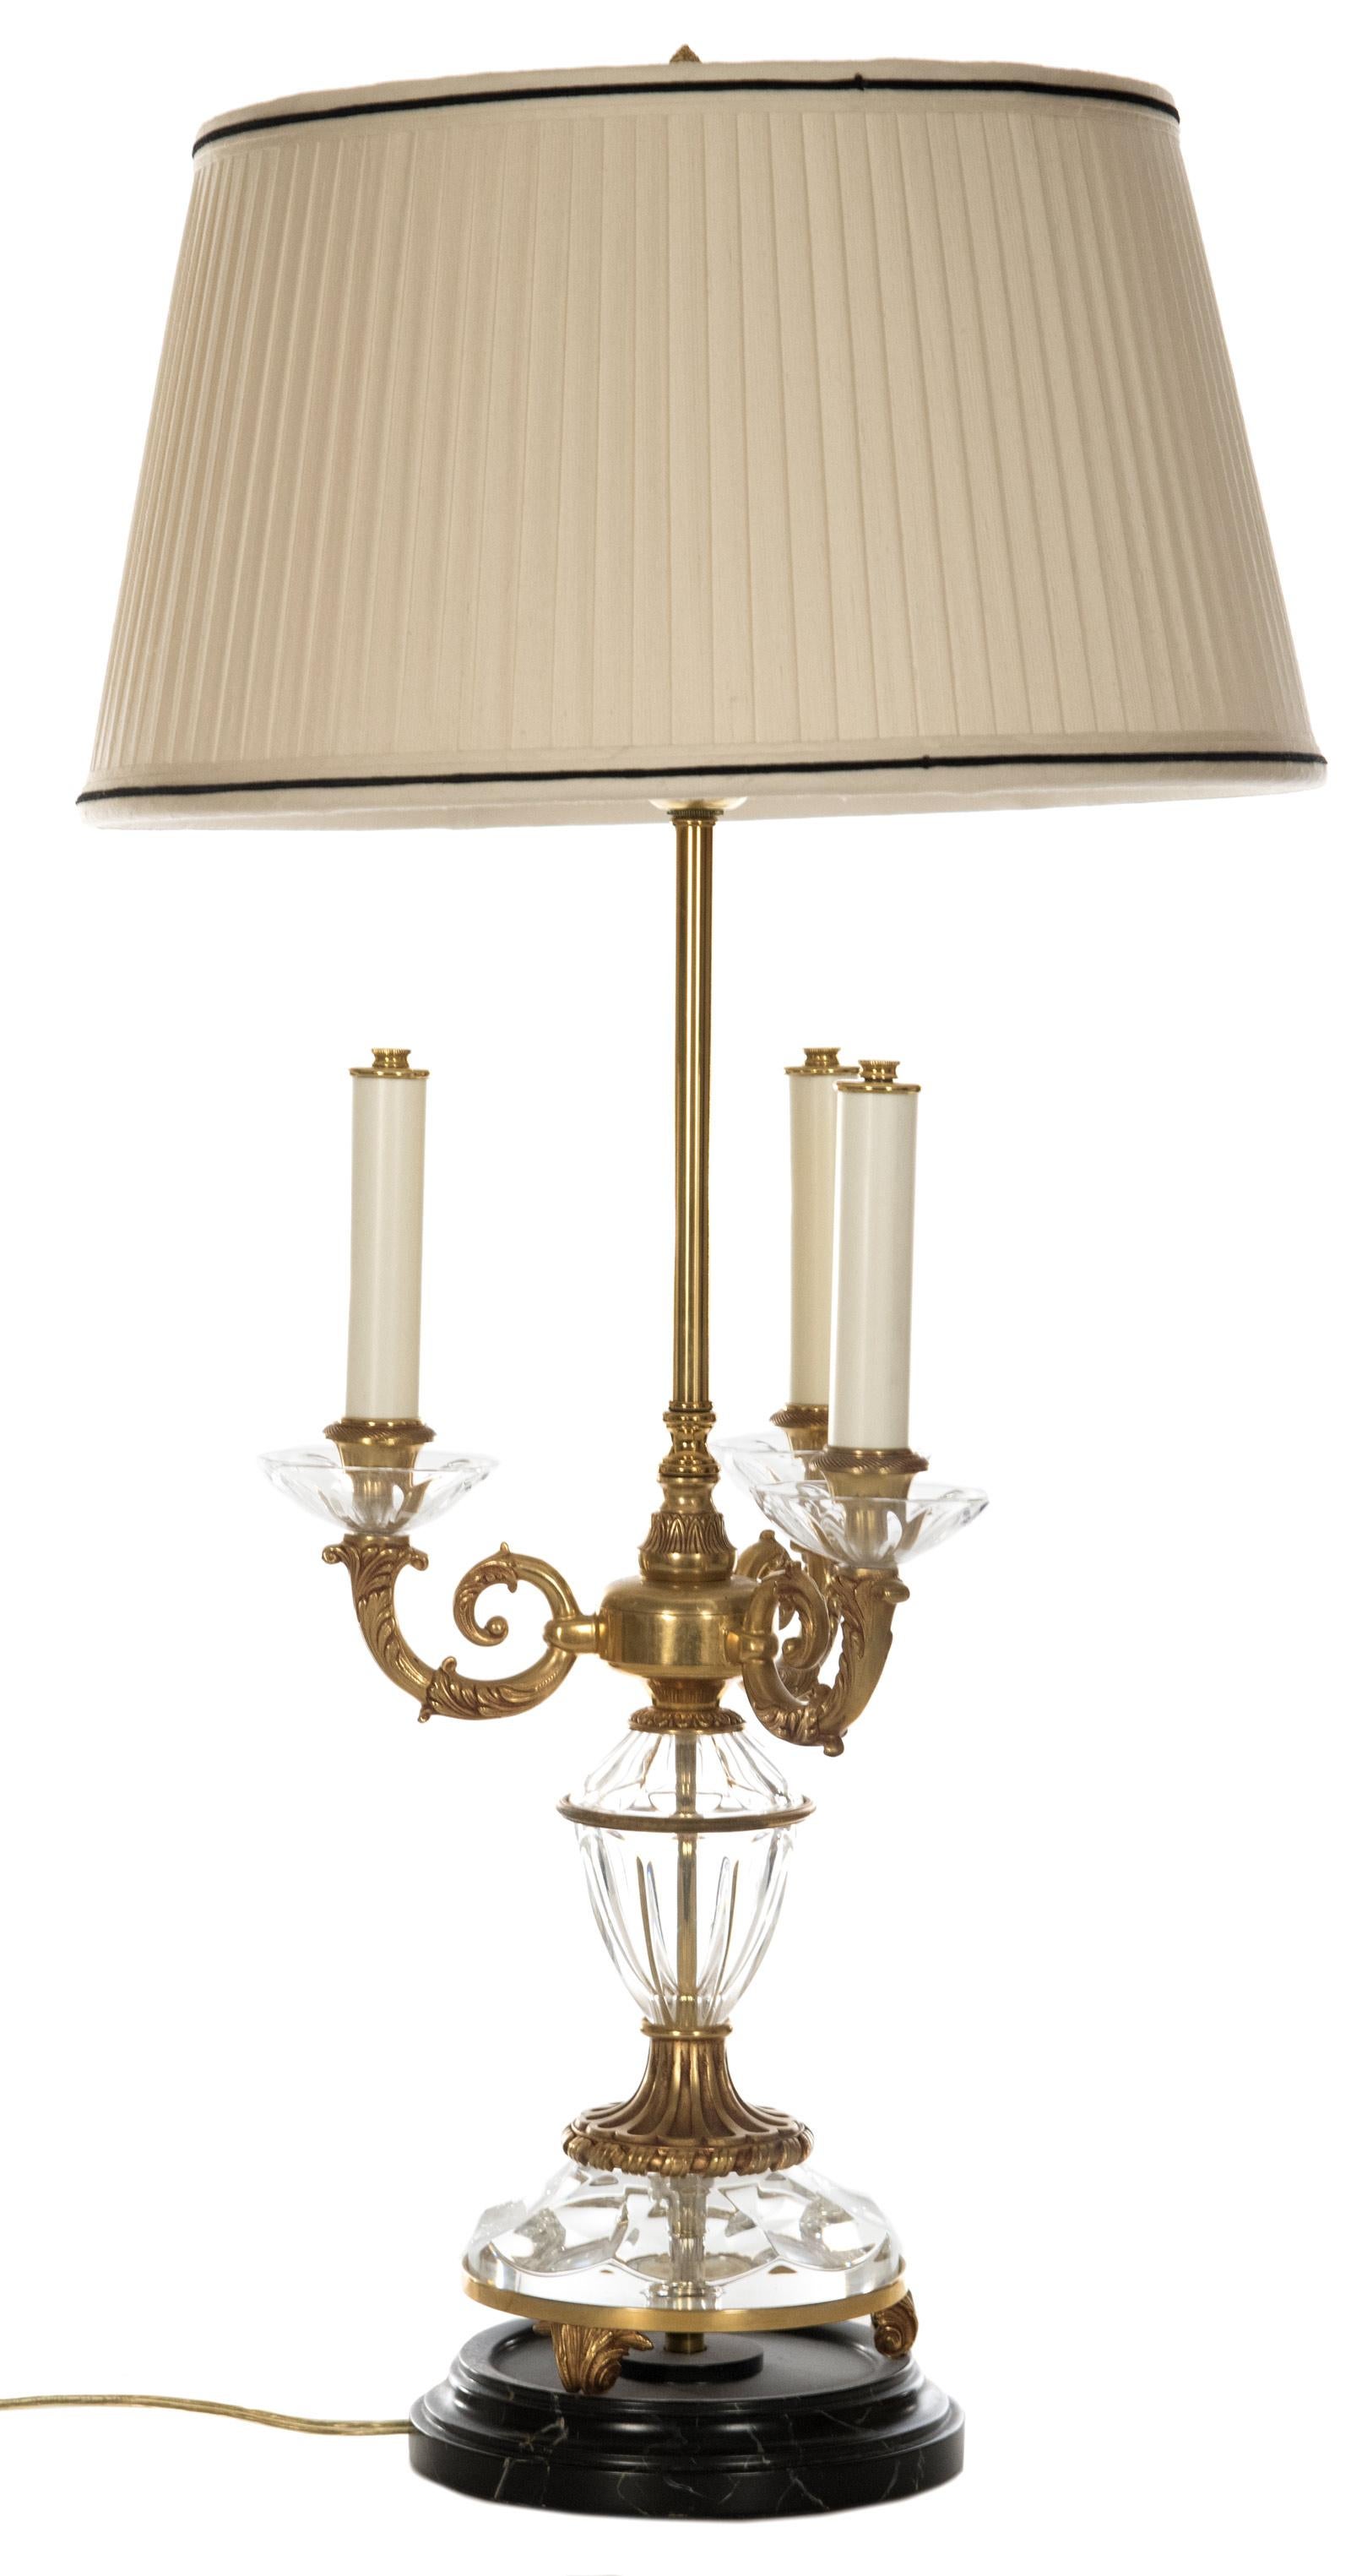 A faux candelabra table lamp of crystal and brass, three arms with chased detailing supporting candlestick forms, the thin brass stem supporting two lights within the drum shade, all raised on a round, variegated black and gold marble base.